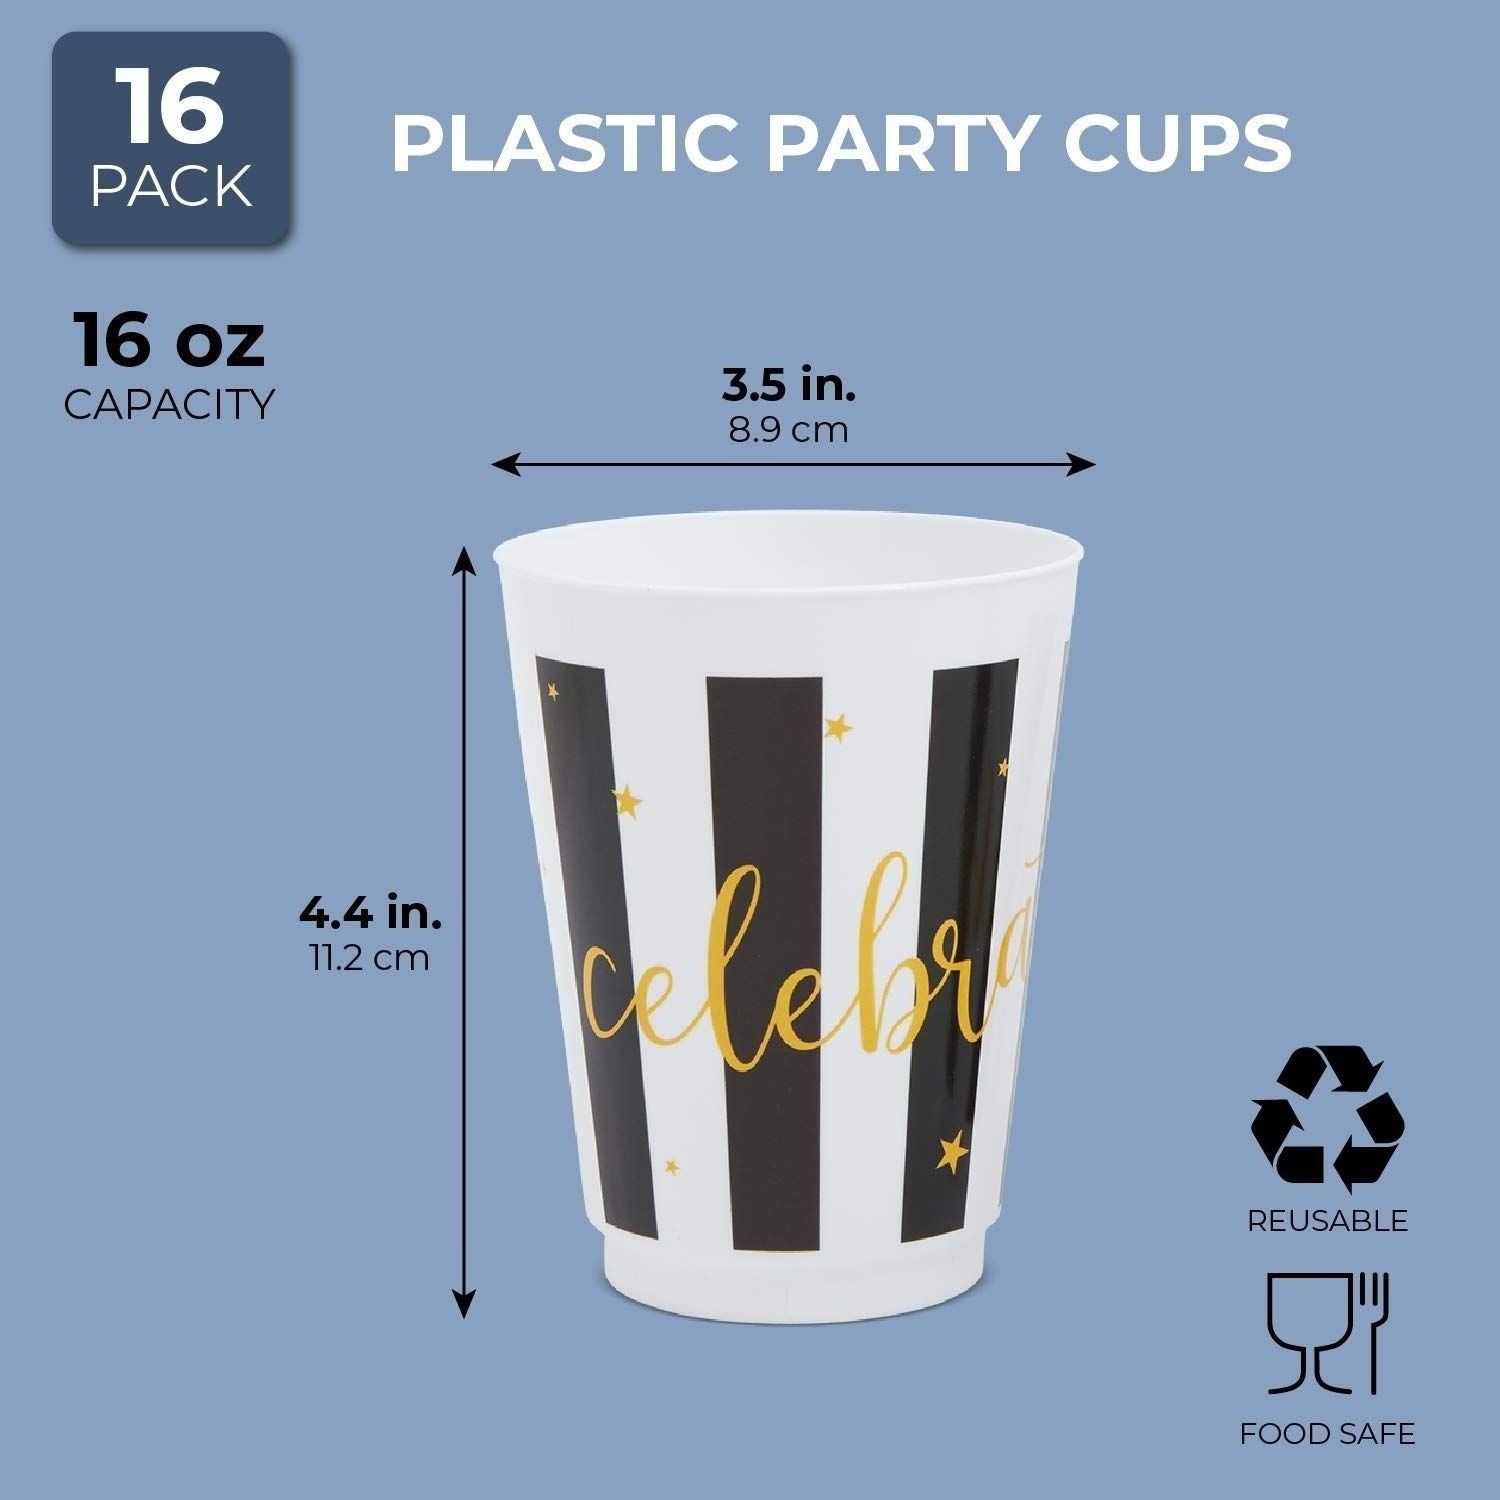 16x Plastic 16 oz Party Cups Celebrate Reusable Tumblers for Birthday Baby  Shower Graduation Wedding Parties, Black and White - Bed Bath & Beyond -  31094344